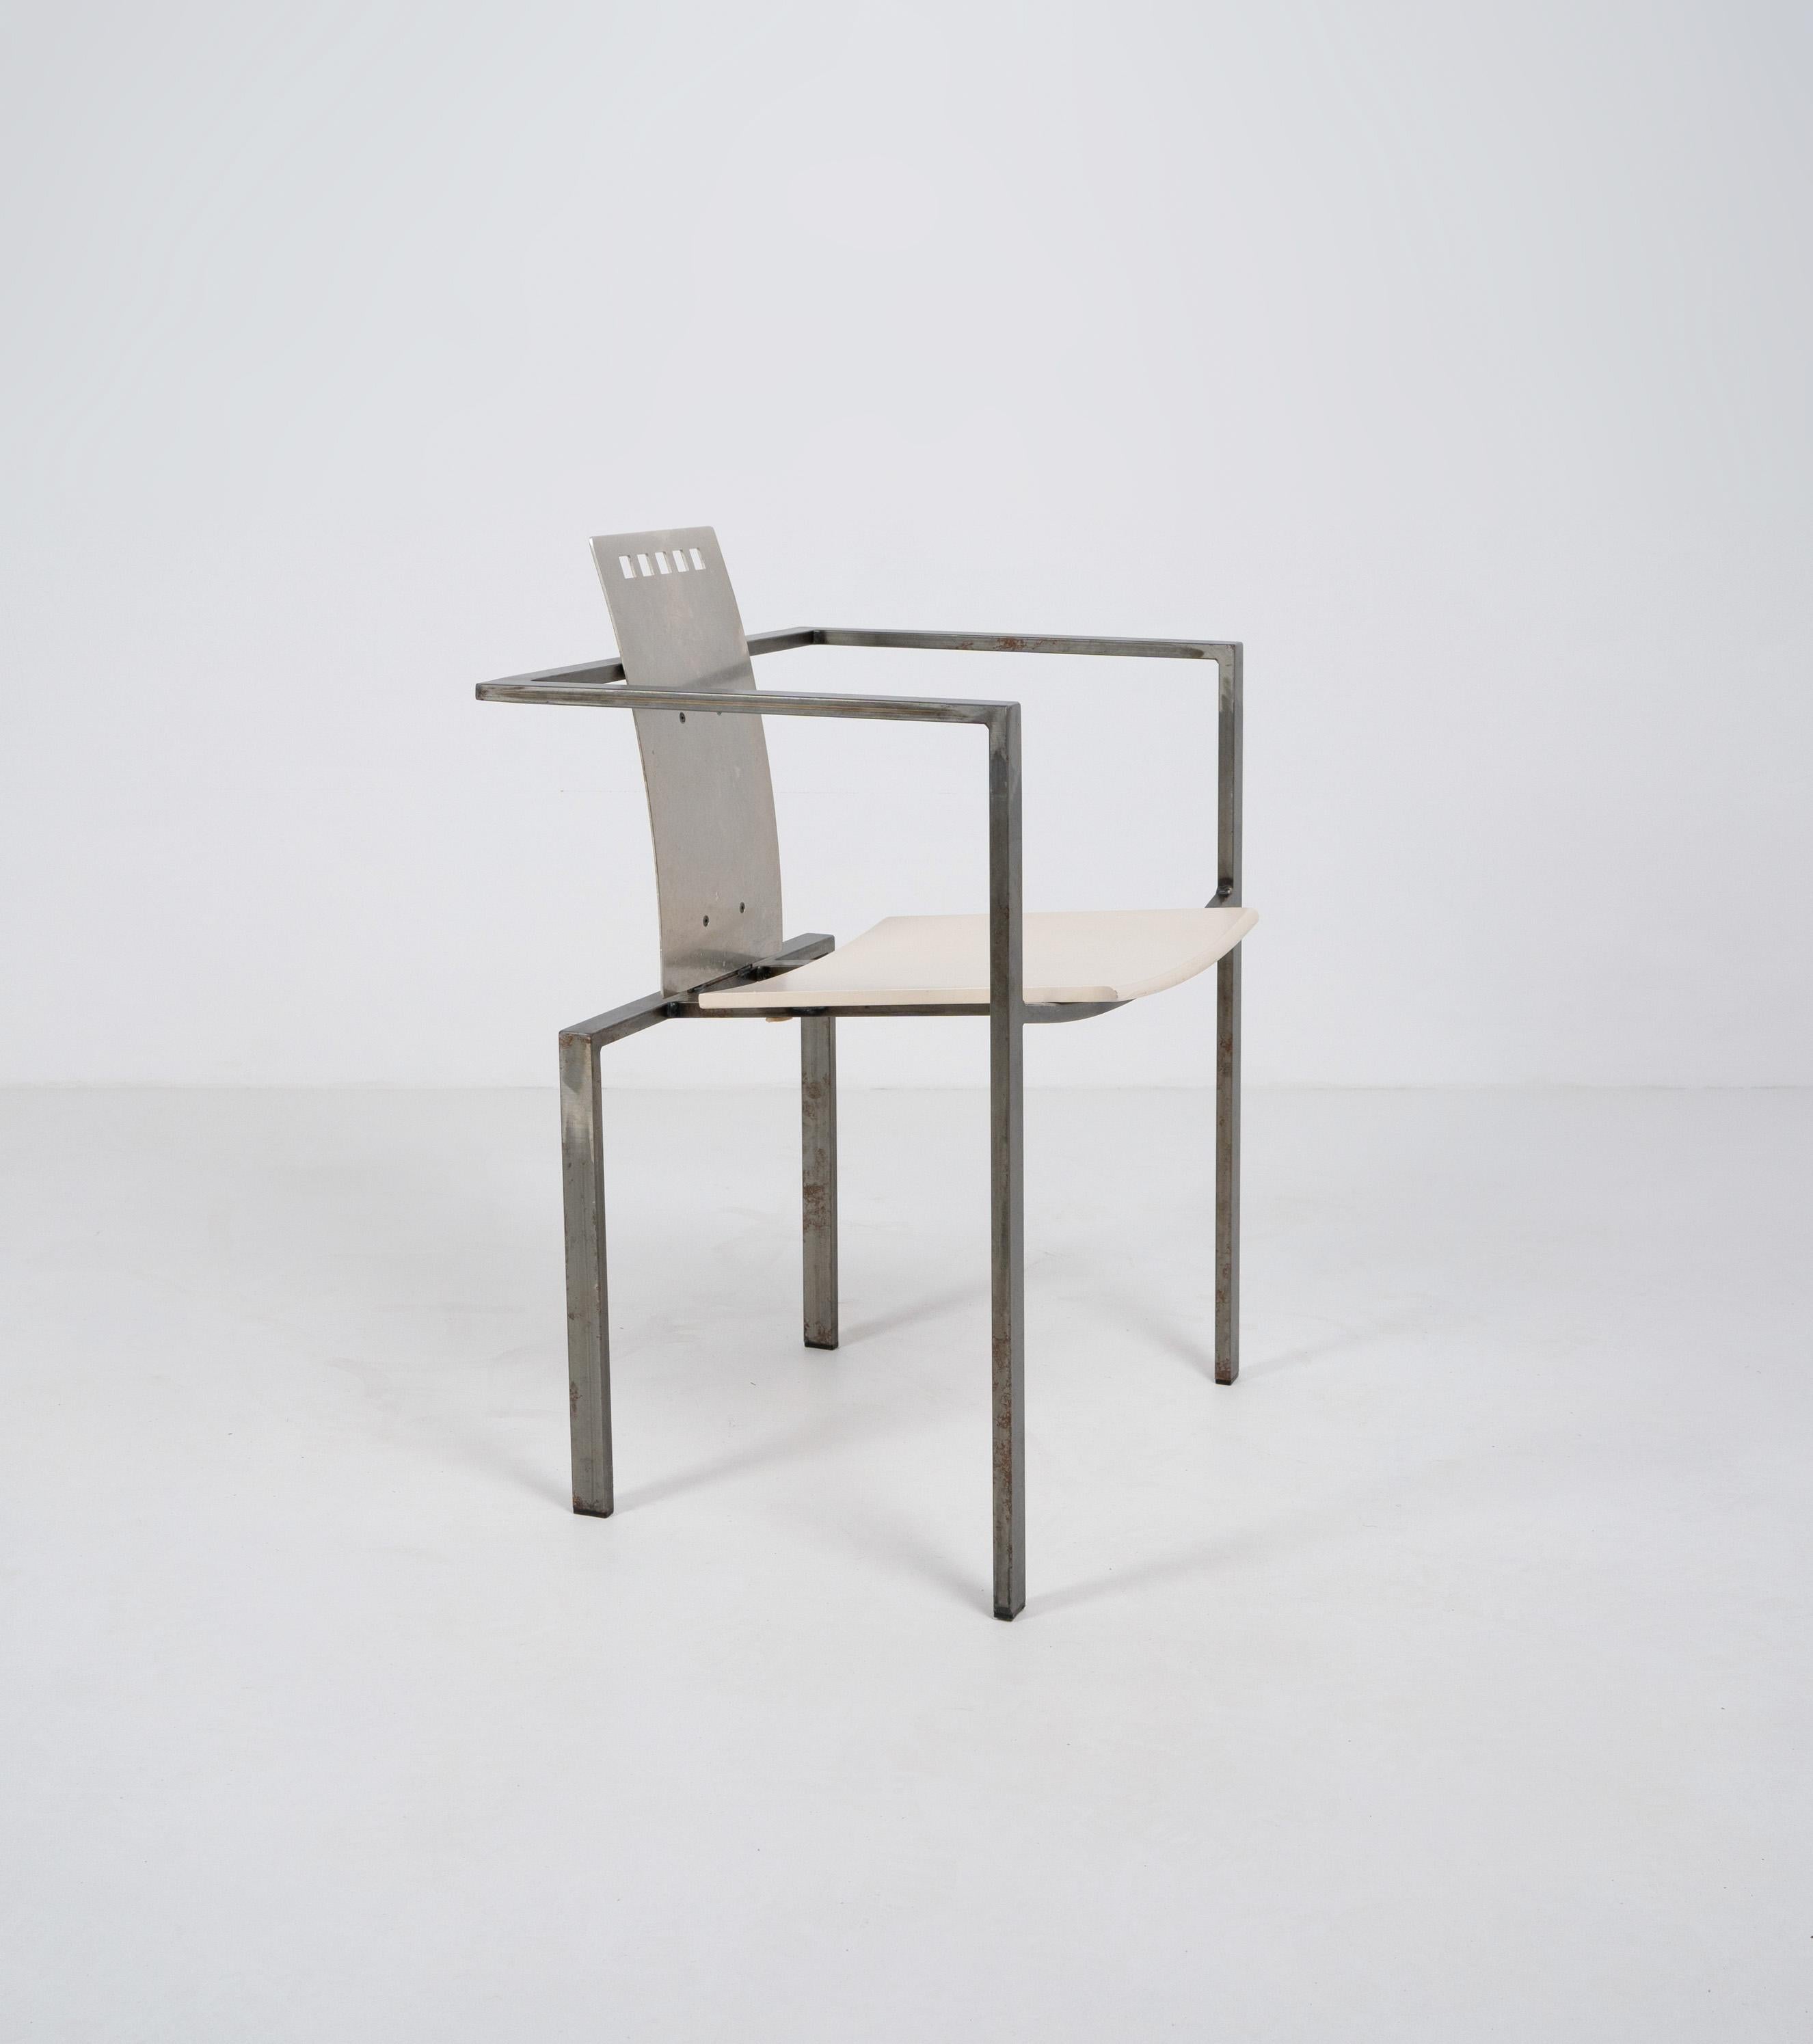 Postmodern steel chair designed by Karl Friedrich Förster. Composed of a tubular steel frame and bent steel sheet back rest with square laser cut detailing and an off white painted plywood seat. 

Dimensions (cm, approx): 
Height: 83
Width: